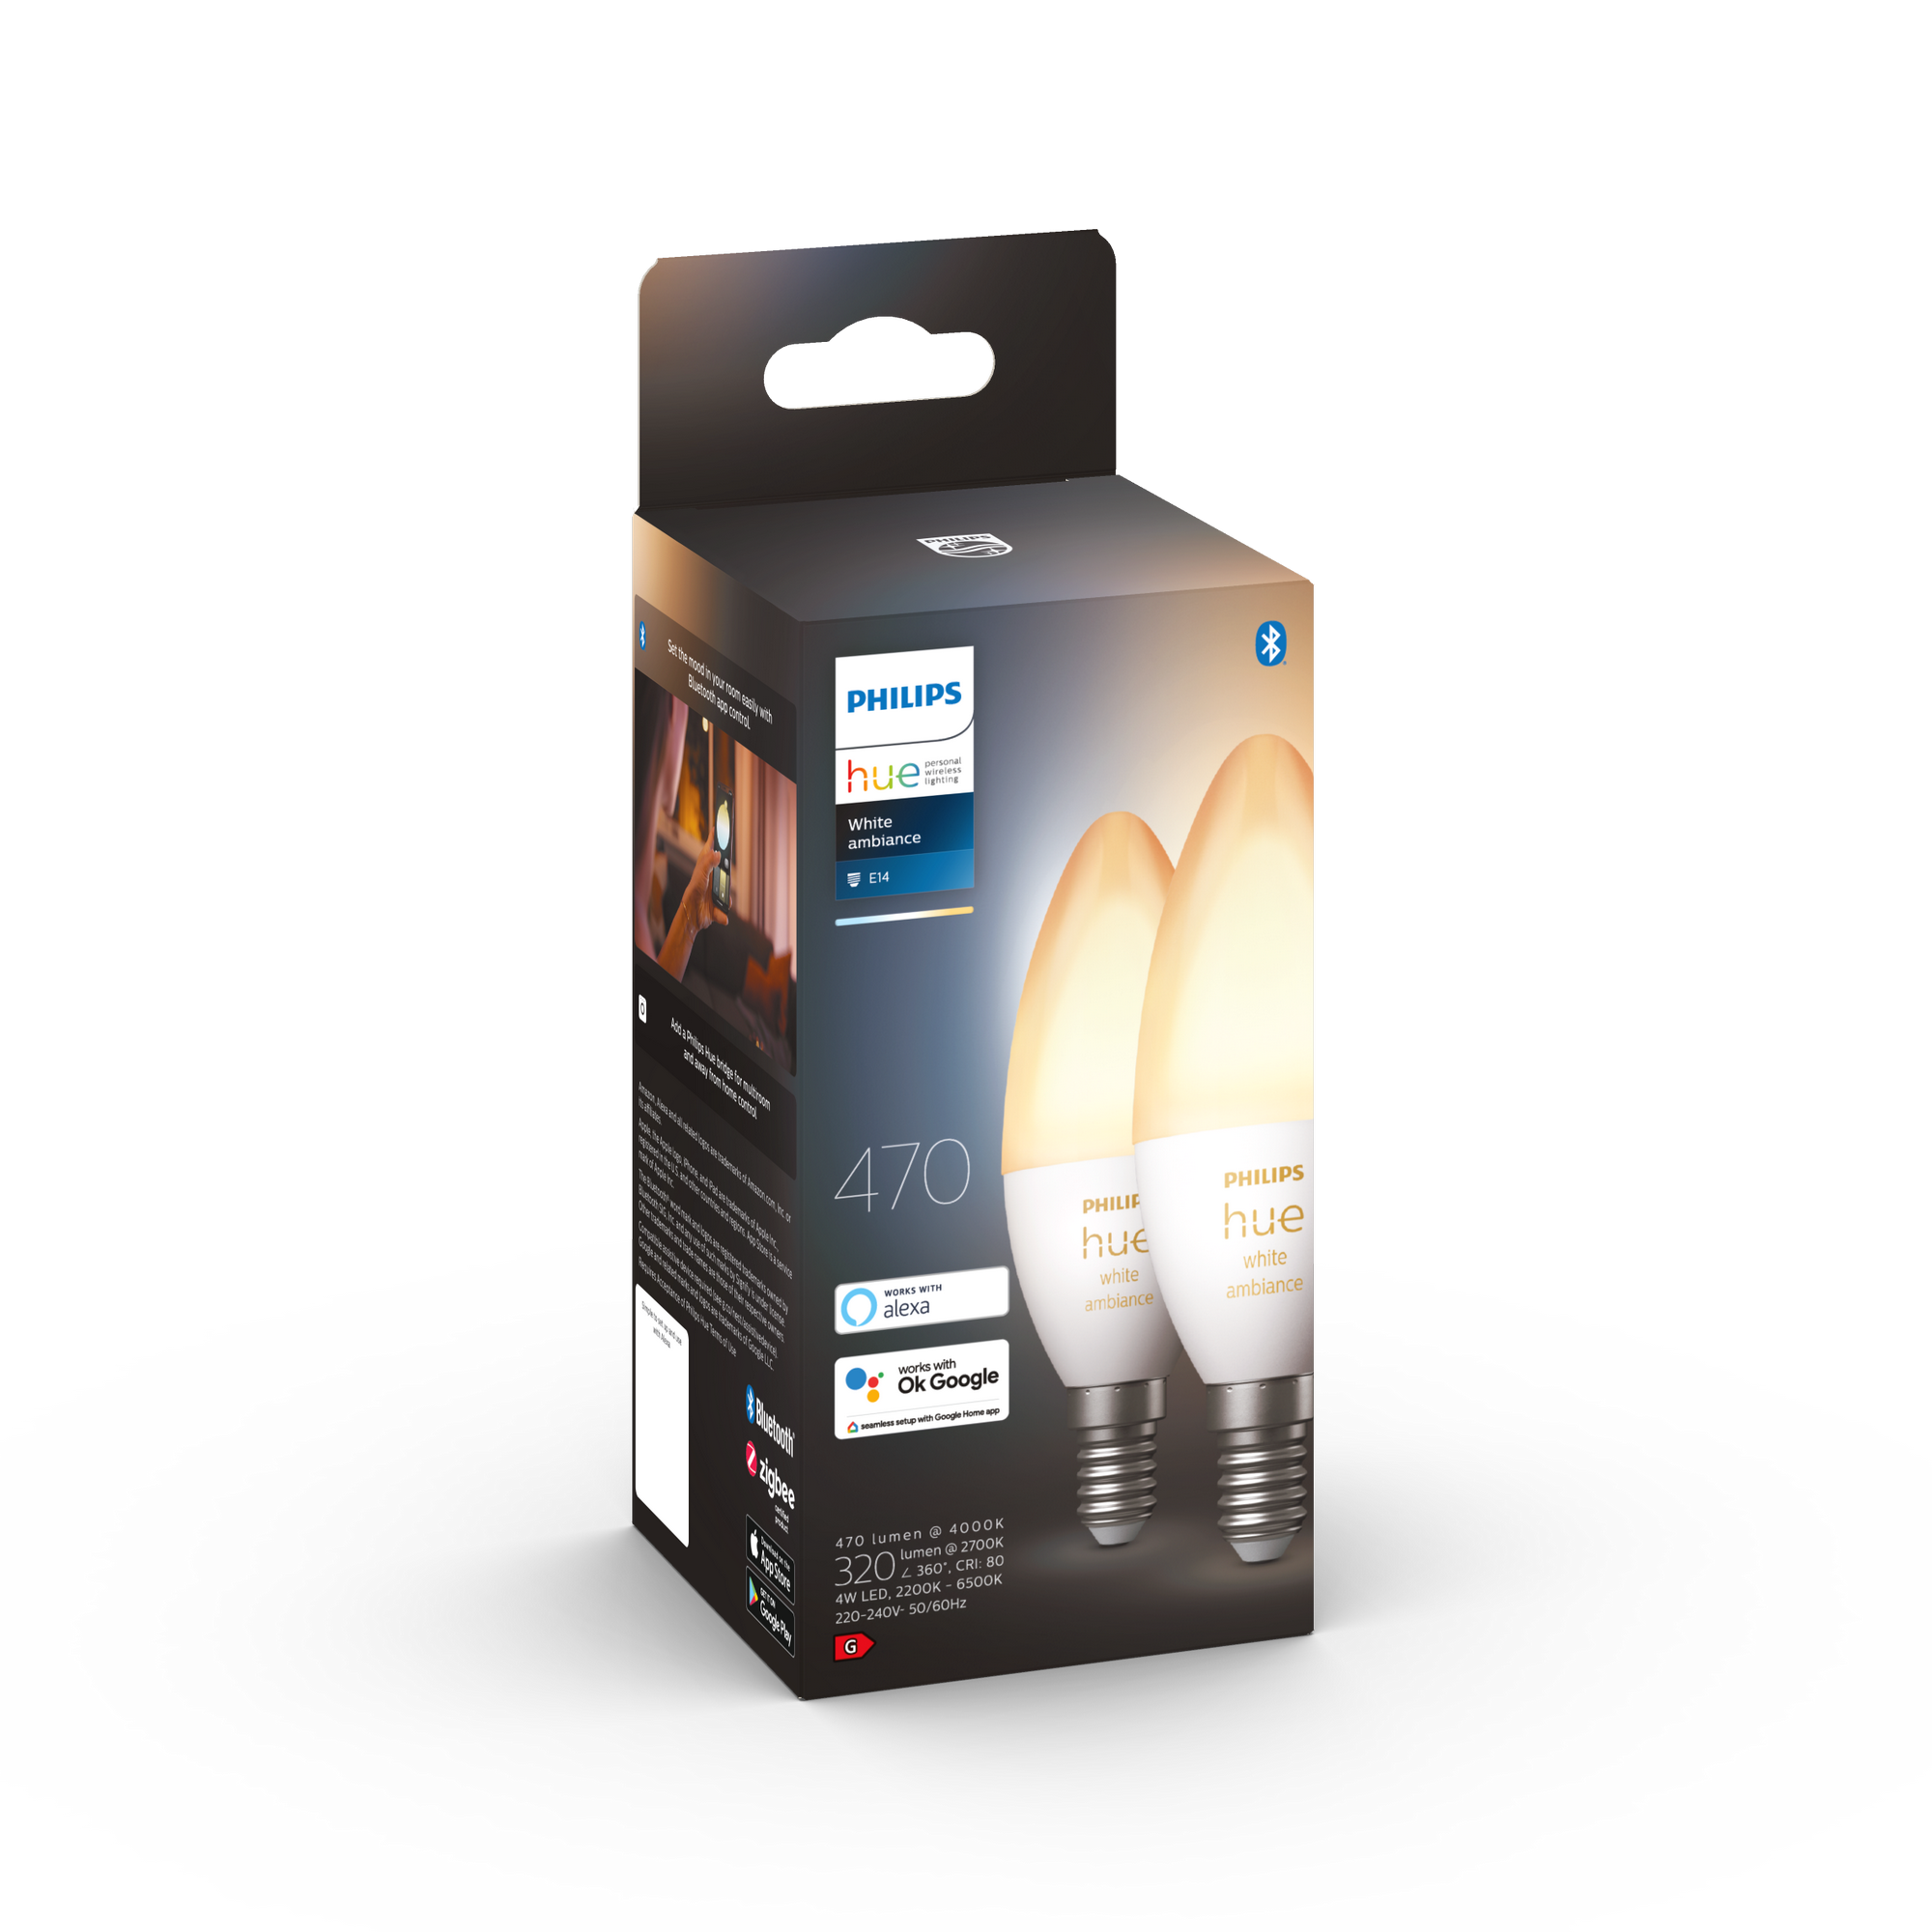 LED-Lampe 'Hue White Ambiance' E14 5,2 W, 2er-Pack + product picture